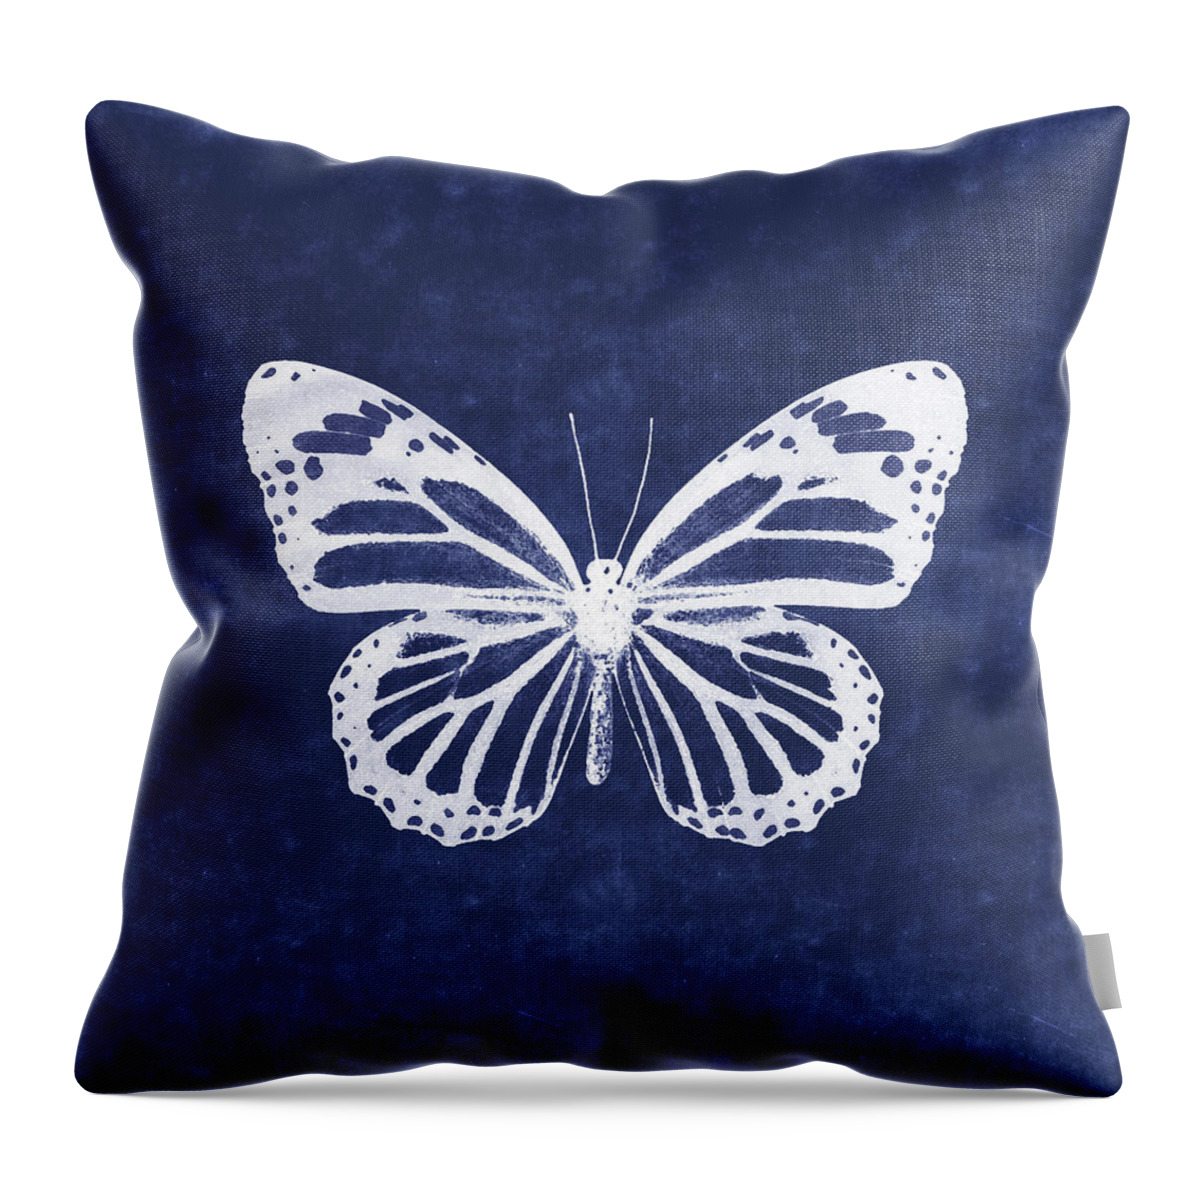 Butterfly Throw Pillow featuring the mixed media White and Indigo Butterfly 3- Art by Linda Woods by Linda Woods